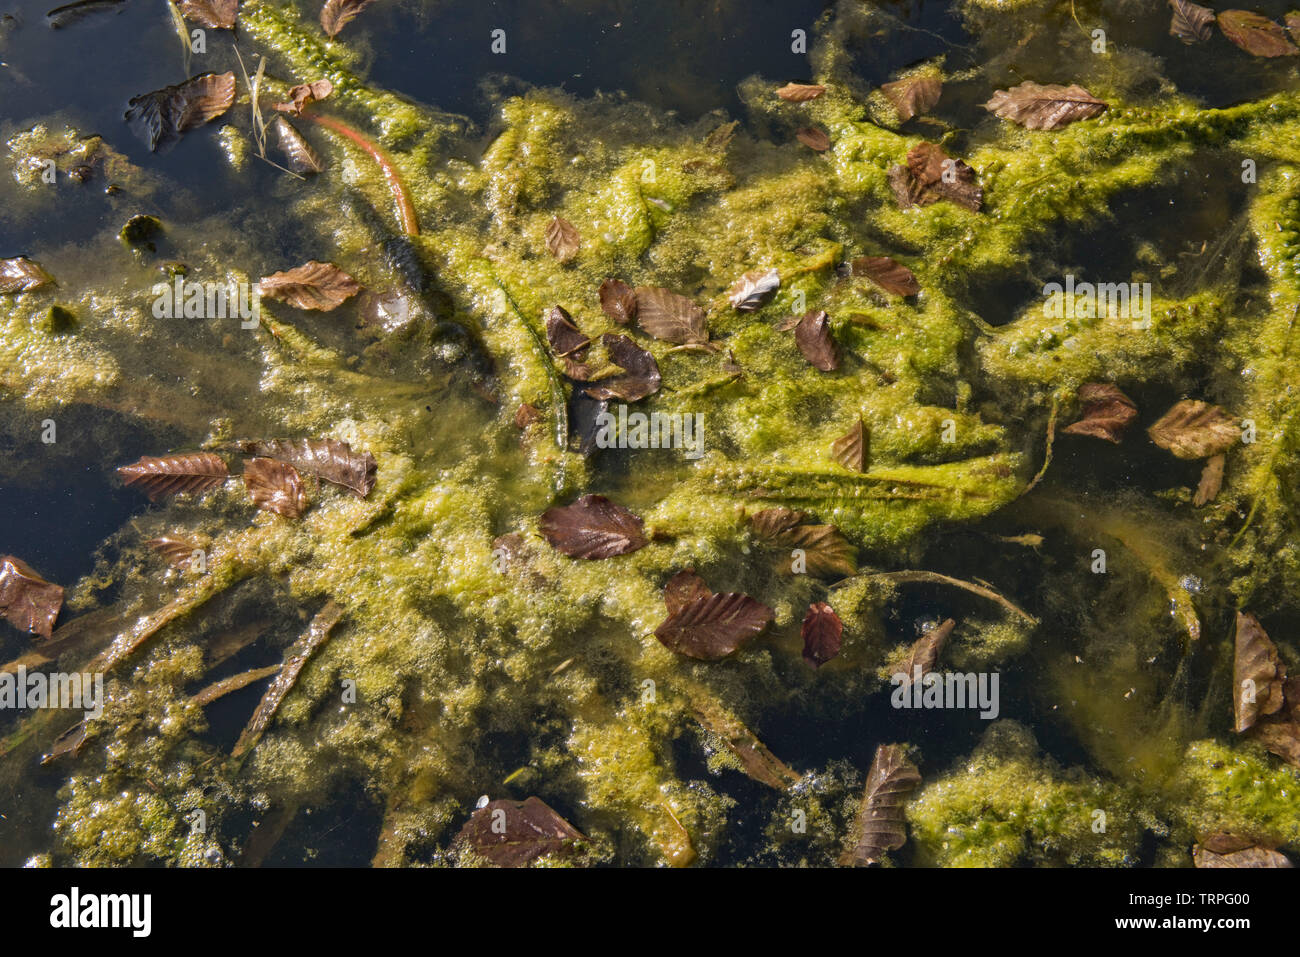 Filamentous algae or blanket weed contaminating a garden  pond, dense growth around aquatic plants in early spring Stock Photo